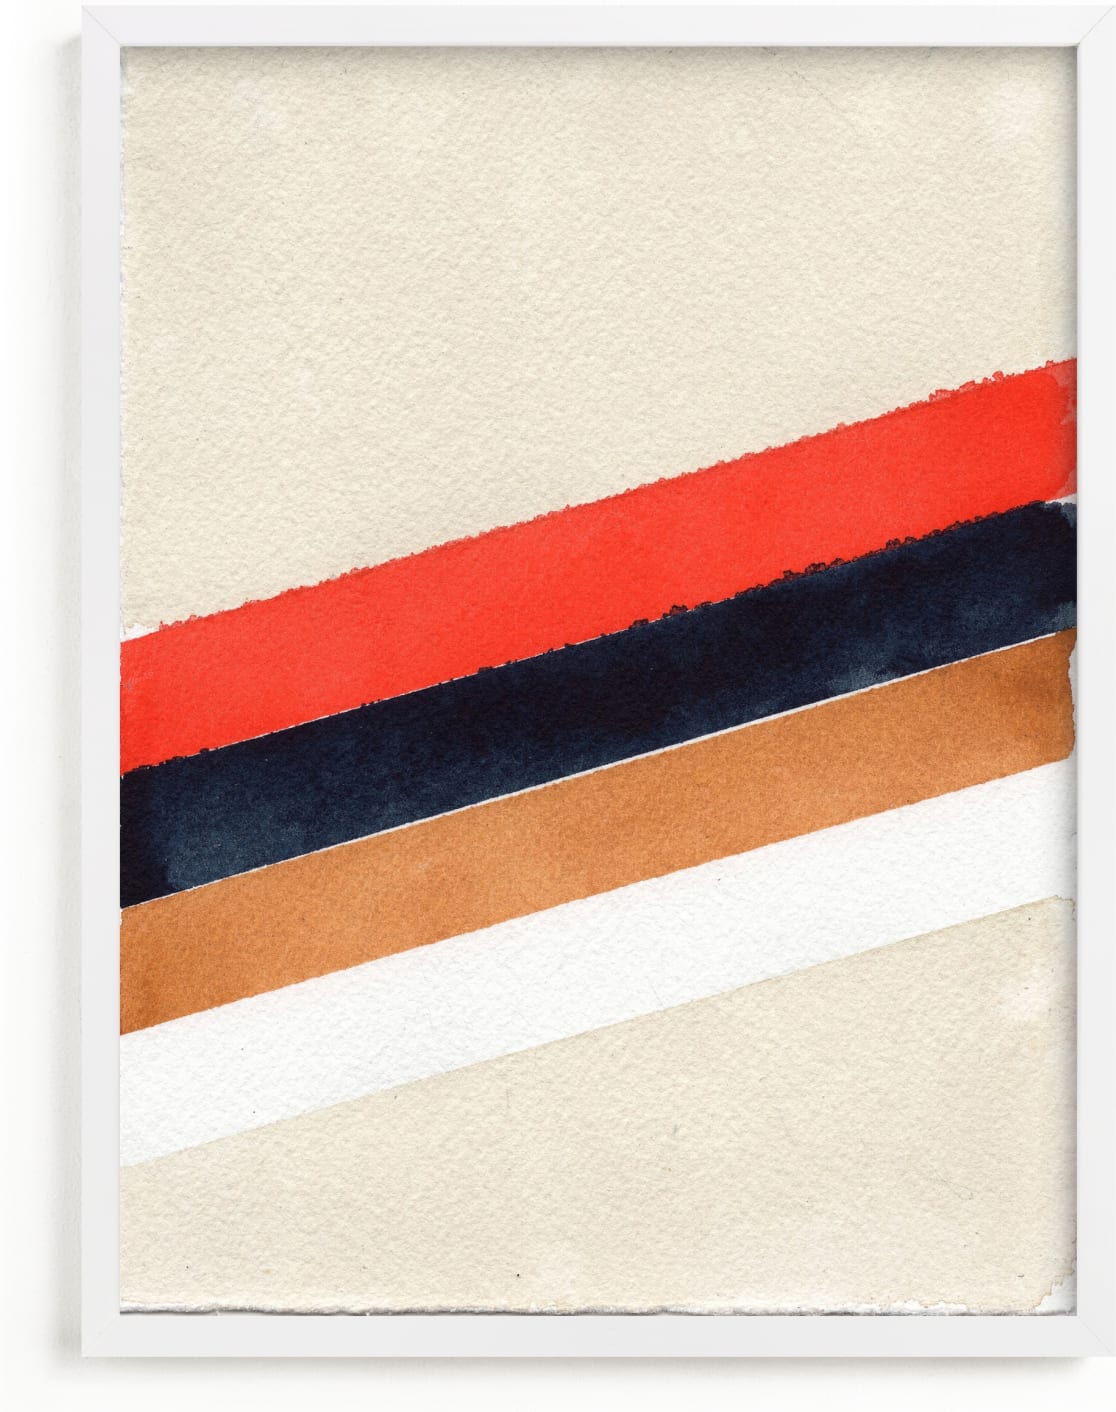 This is a white art by Celeste Duffy called Retro Stripes.